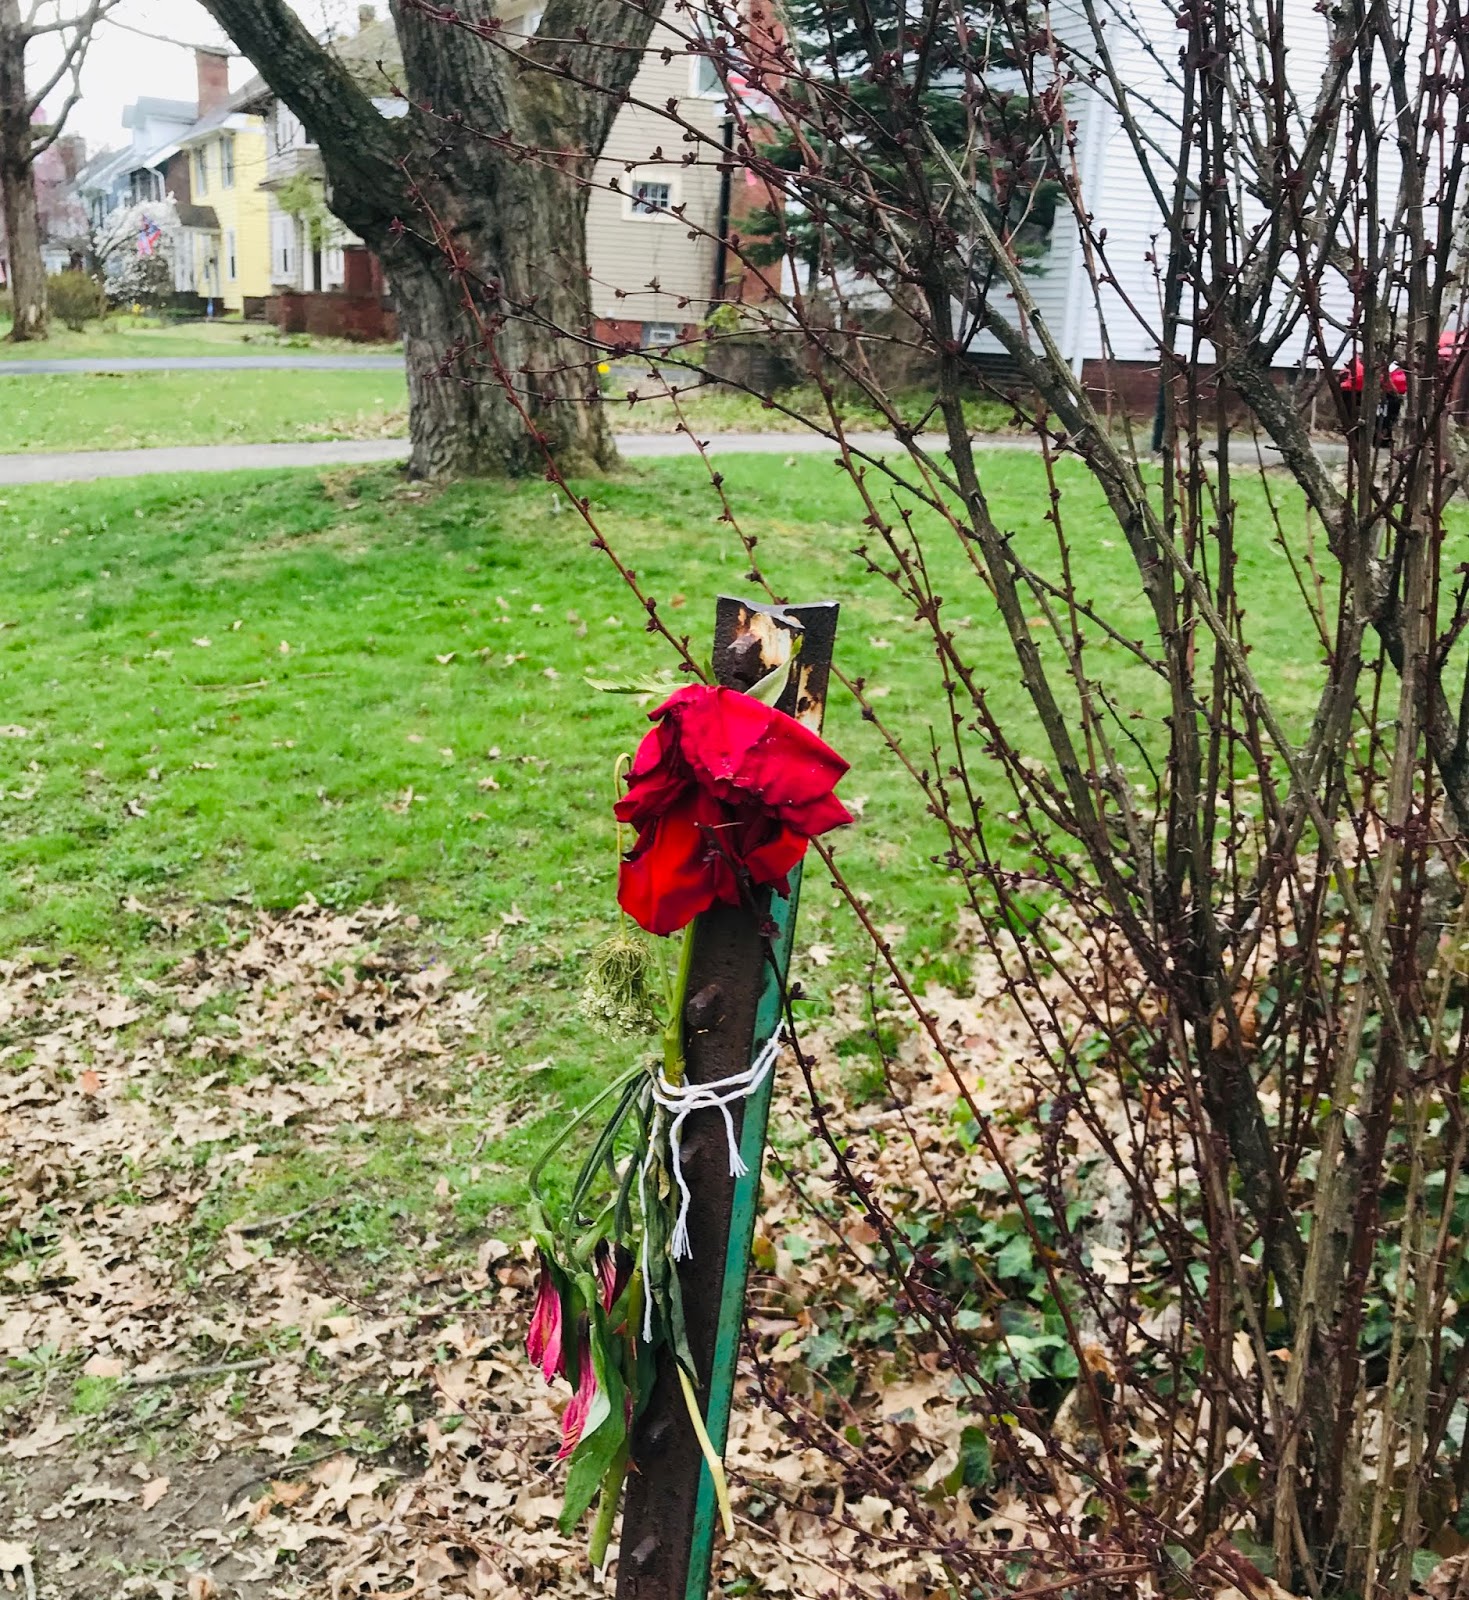 A wilted rose tied to an unused sign post